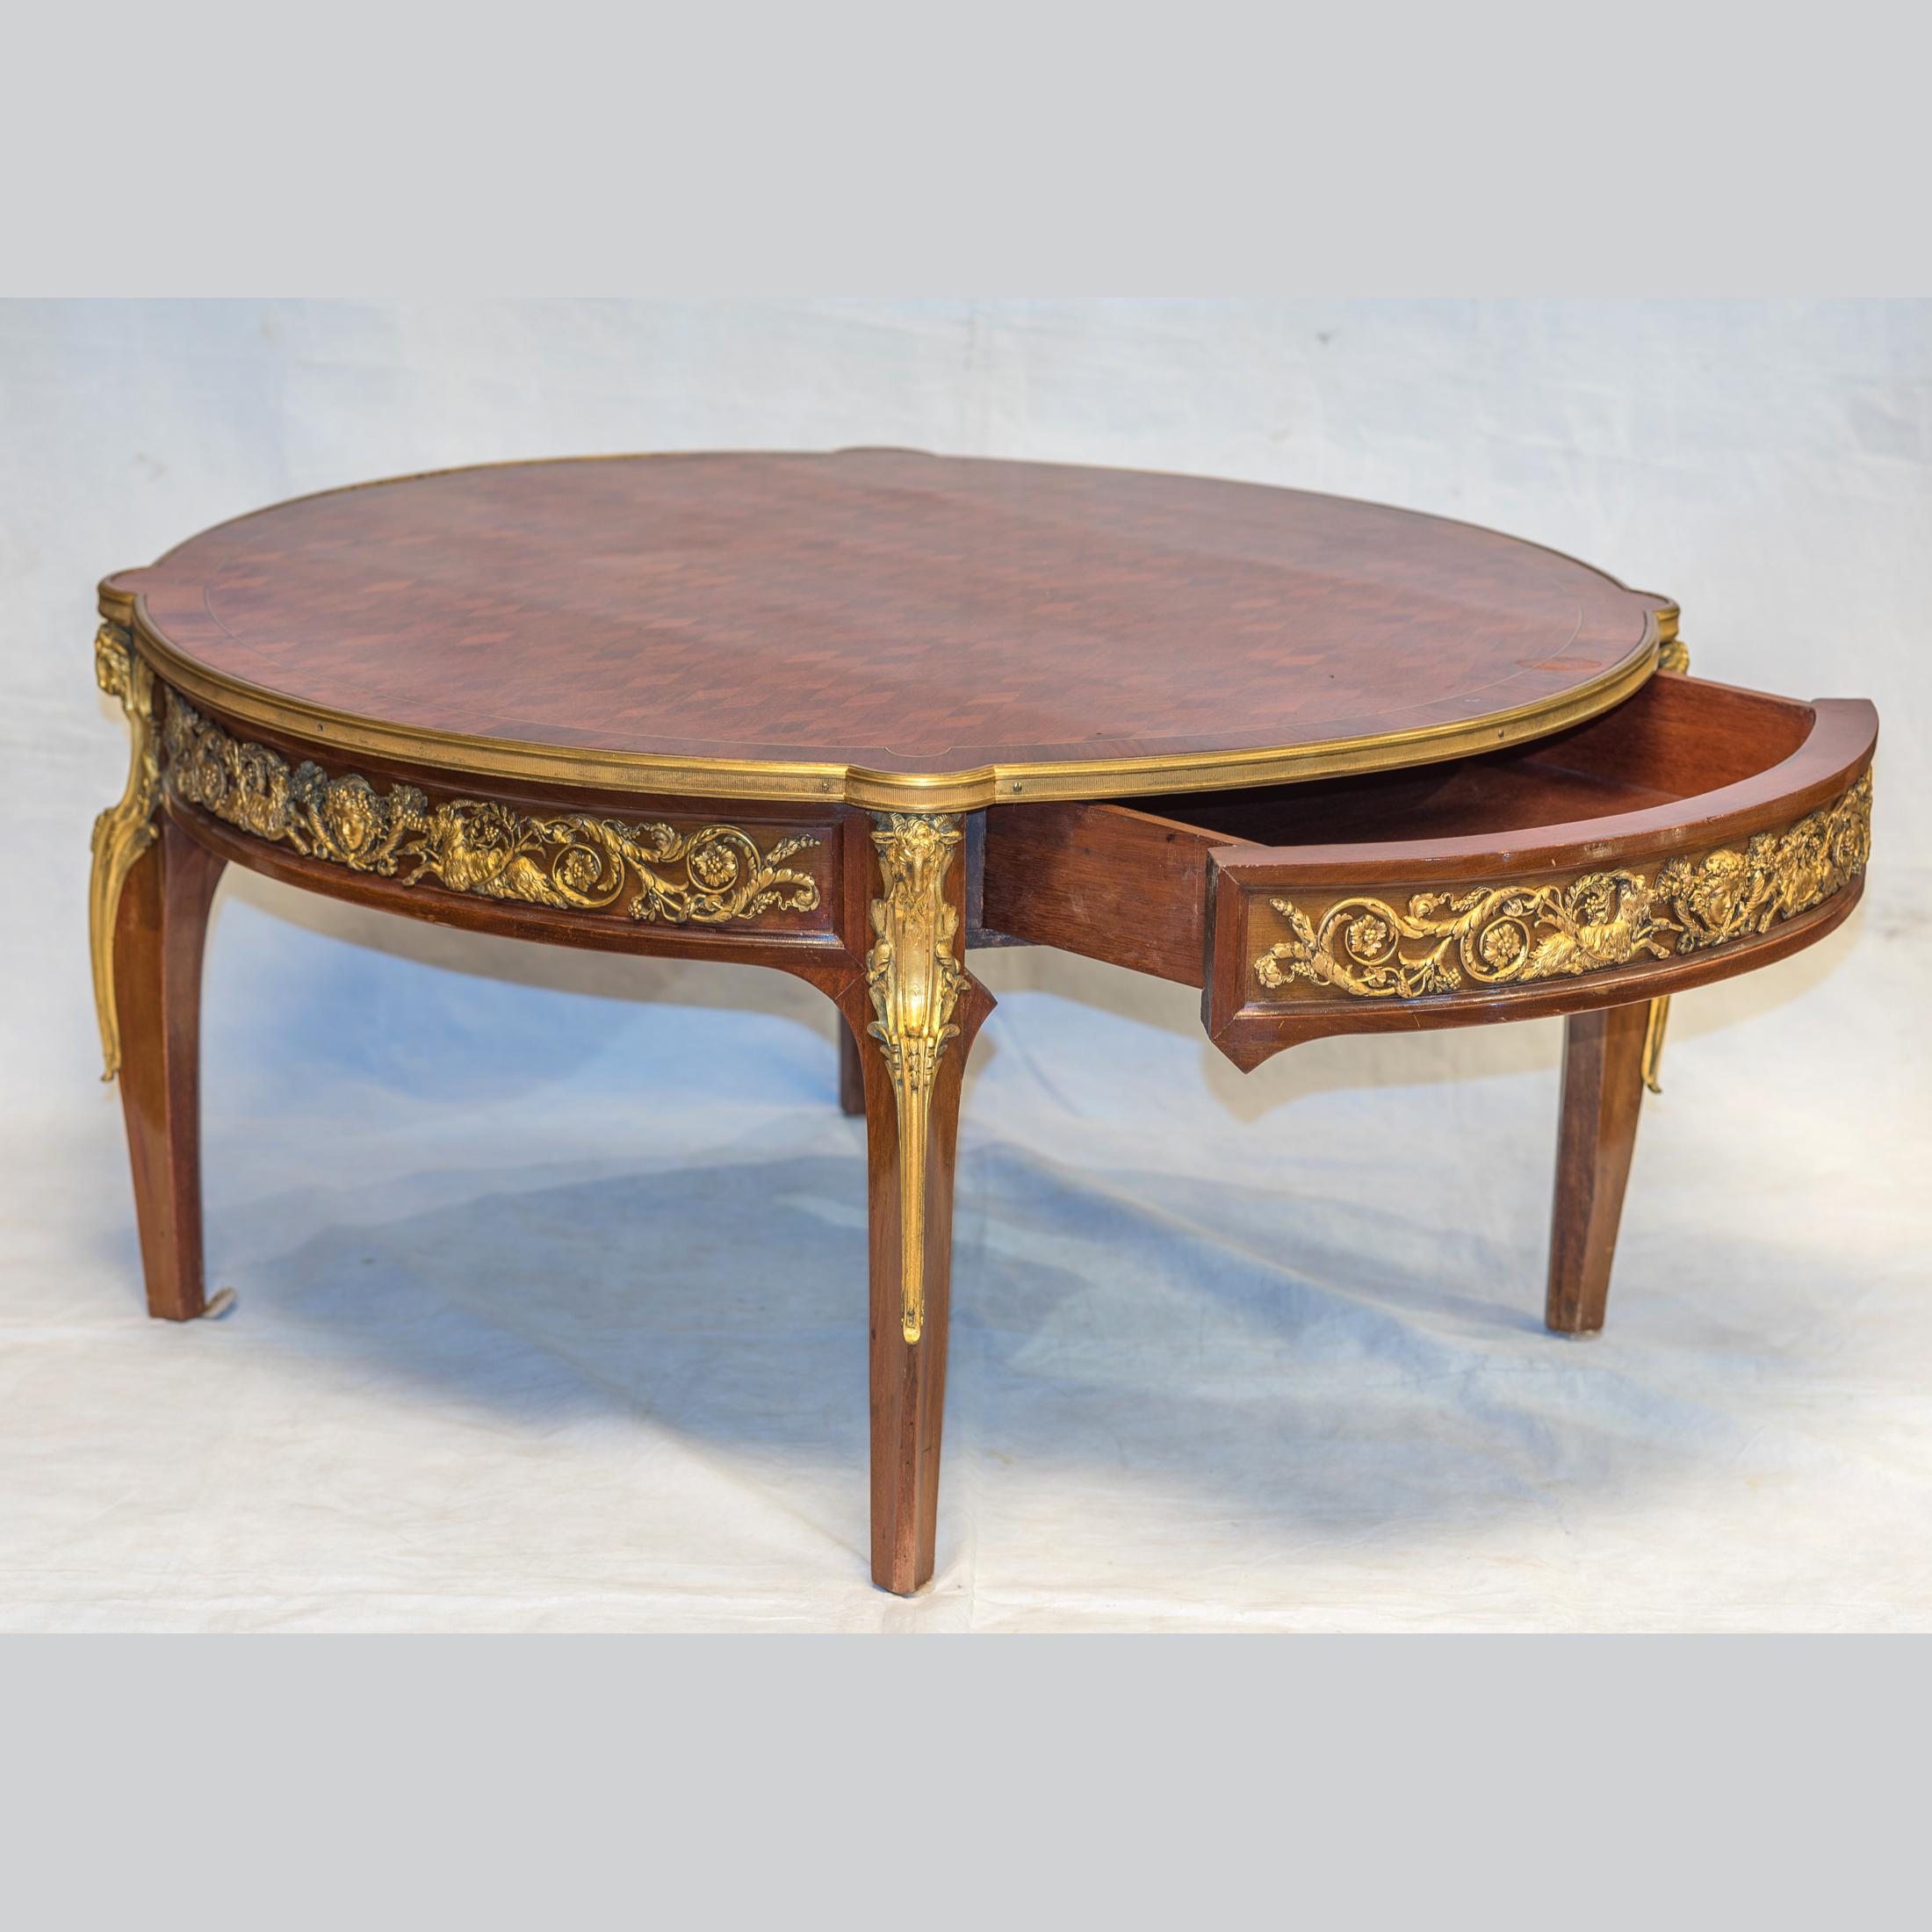 Louis XVI style ormolu-mounted cube parquetry mahogany low round coffee table
Origin: French
Date: 19th century
Dimension: 18 in x 36 1/2 in.